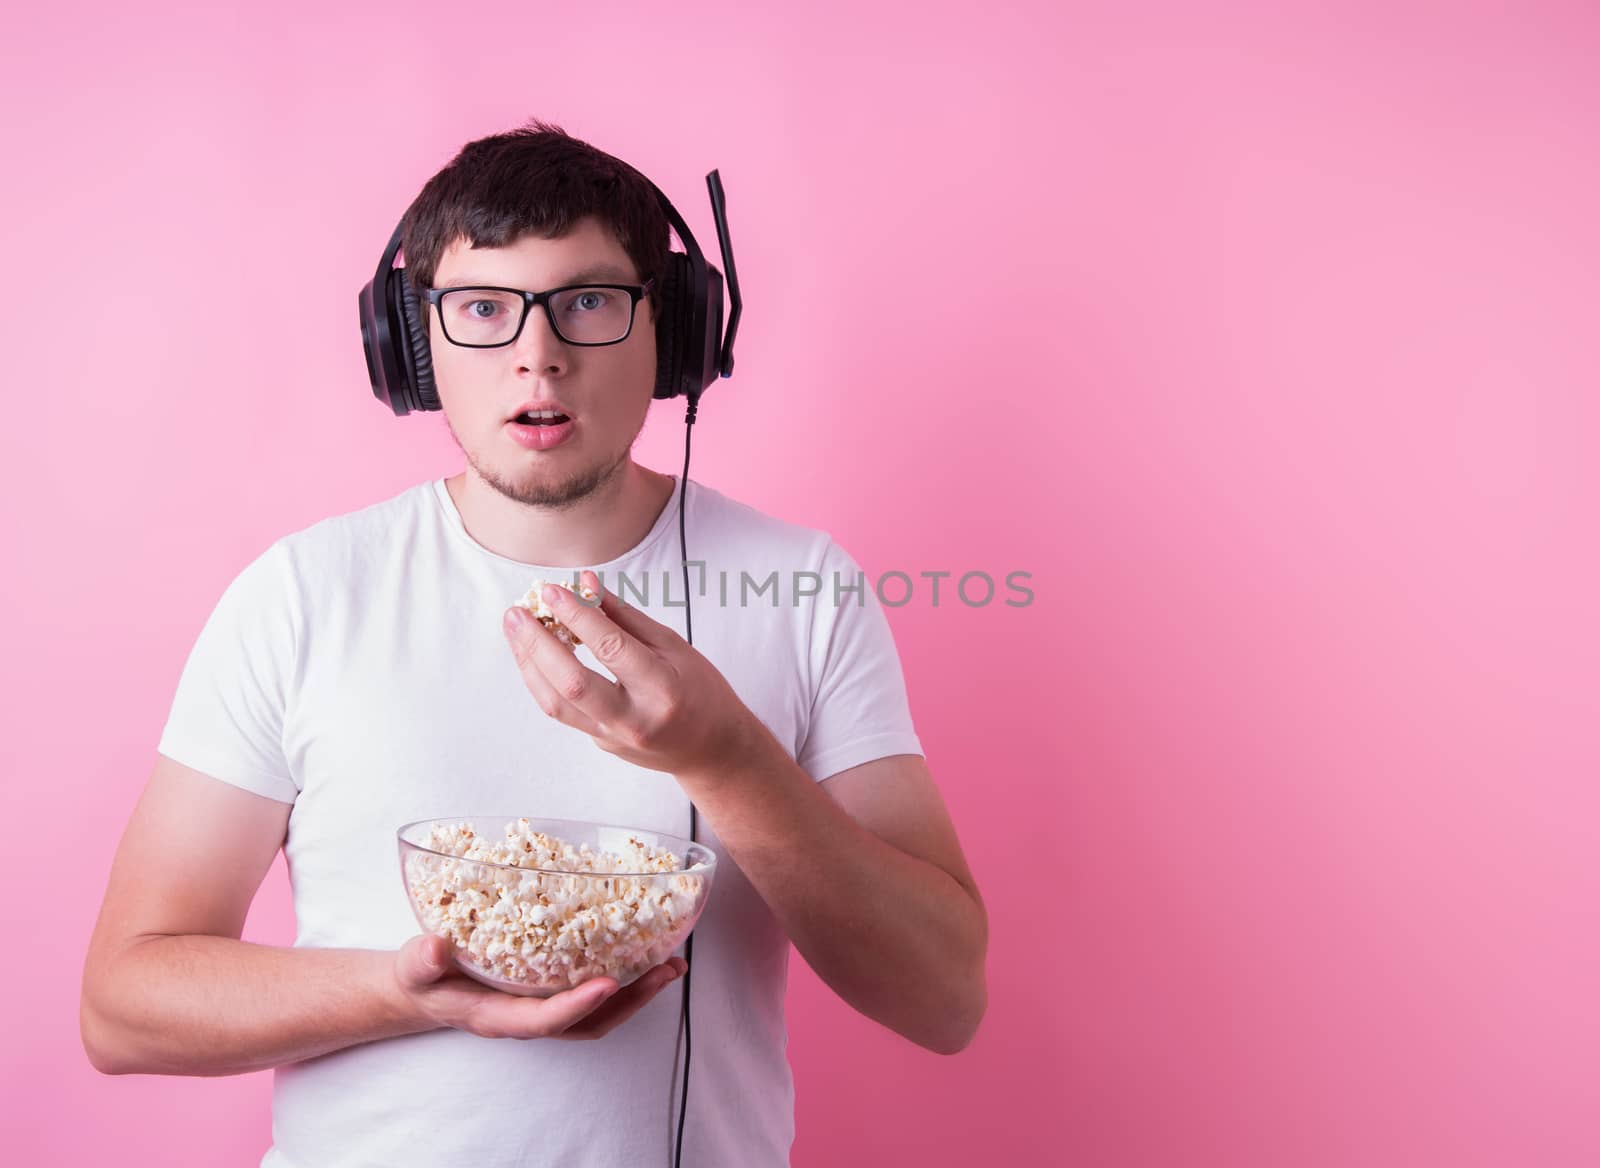 Stay home. Young mesmerized man watching a movie eating popcorn isolated on pink background with copy space